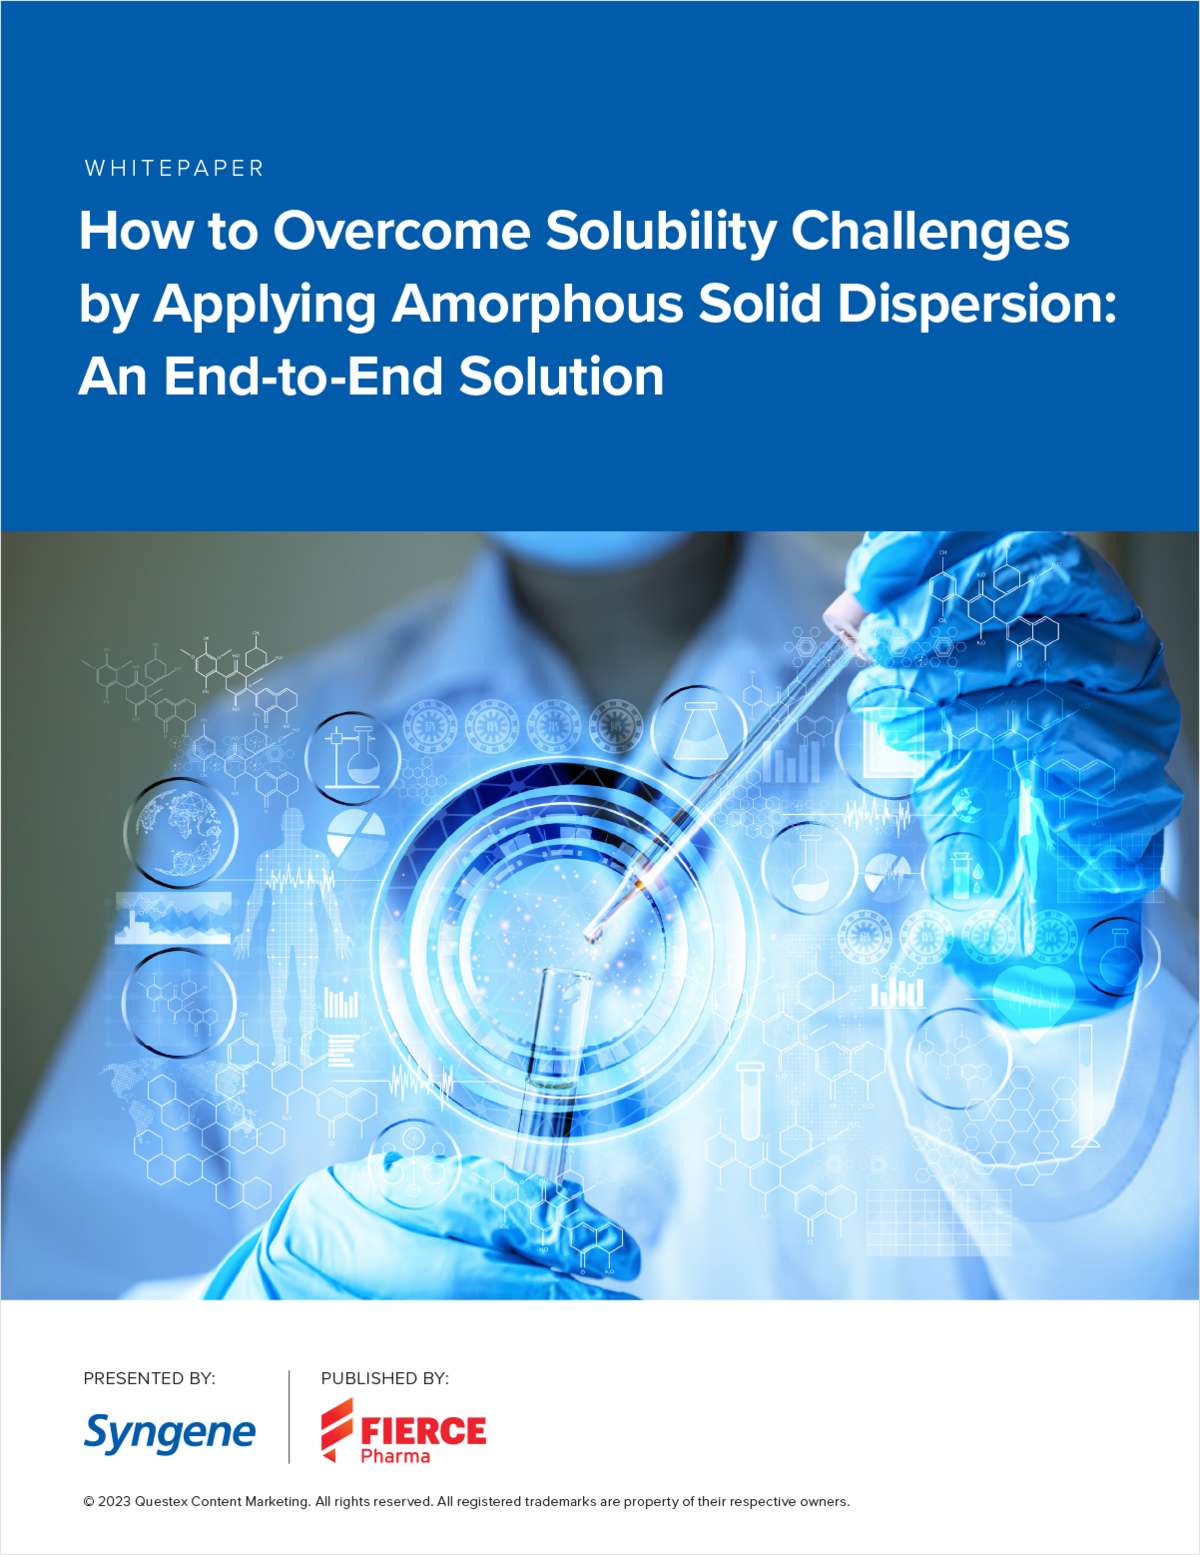 How to Overcome Solubility Challenges by Applying Amorphous Solid Dispersion: An End-to-End Solution